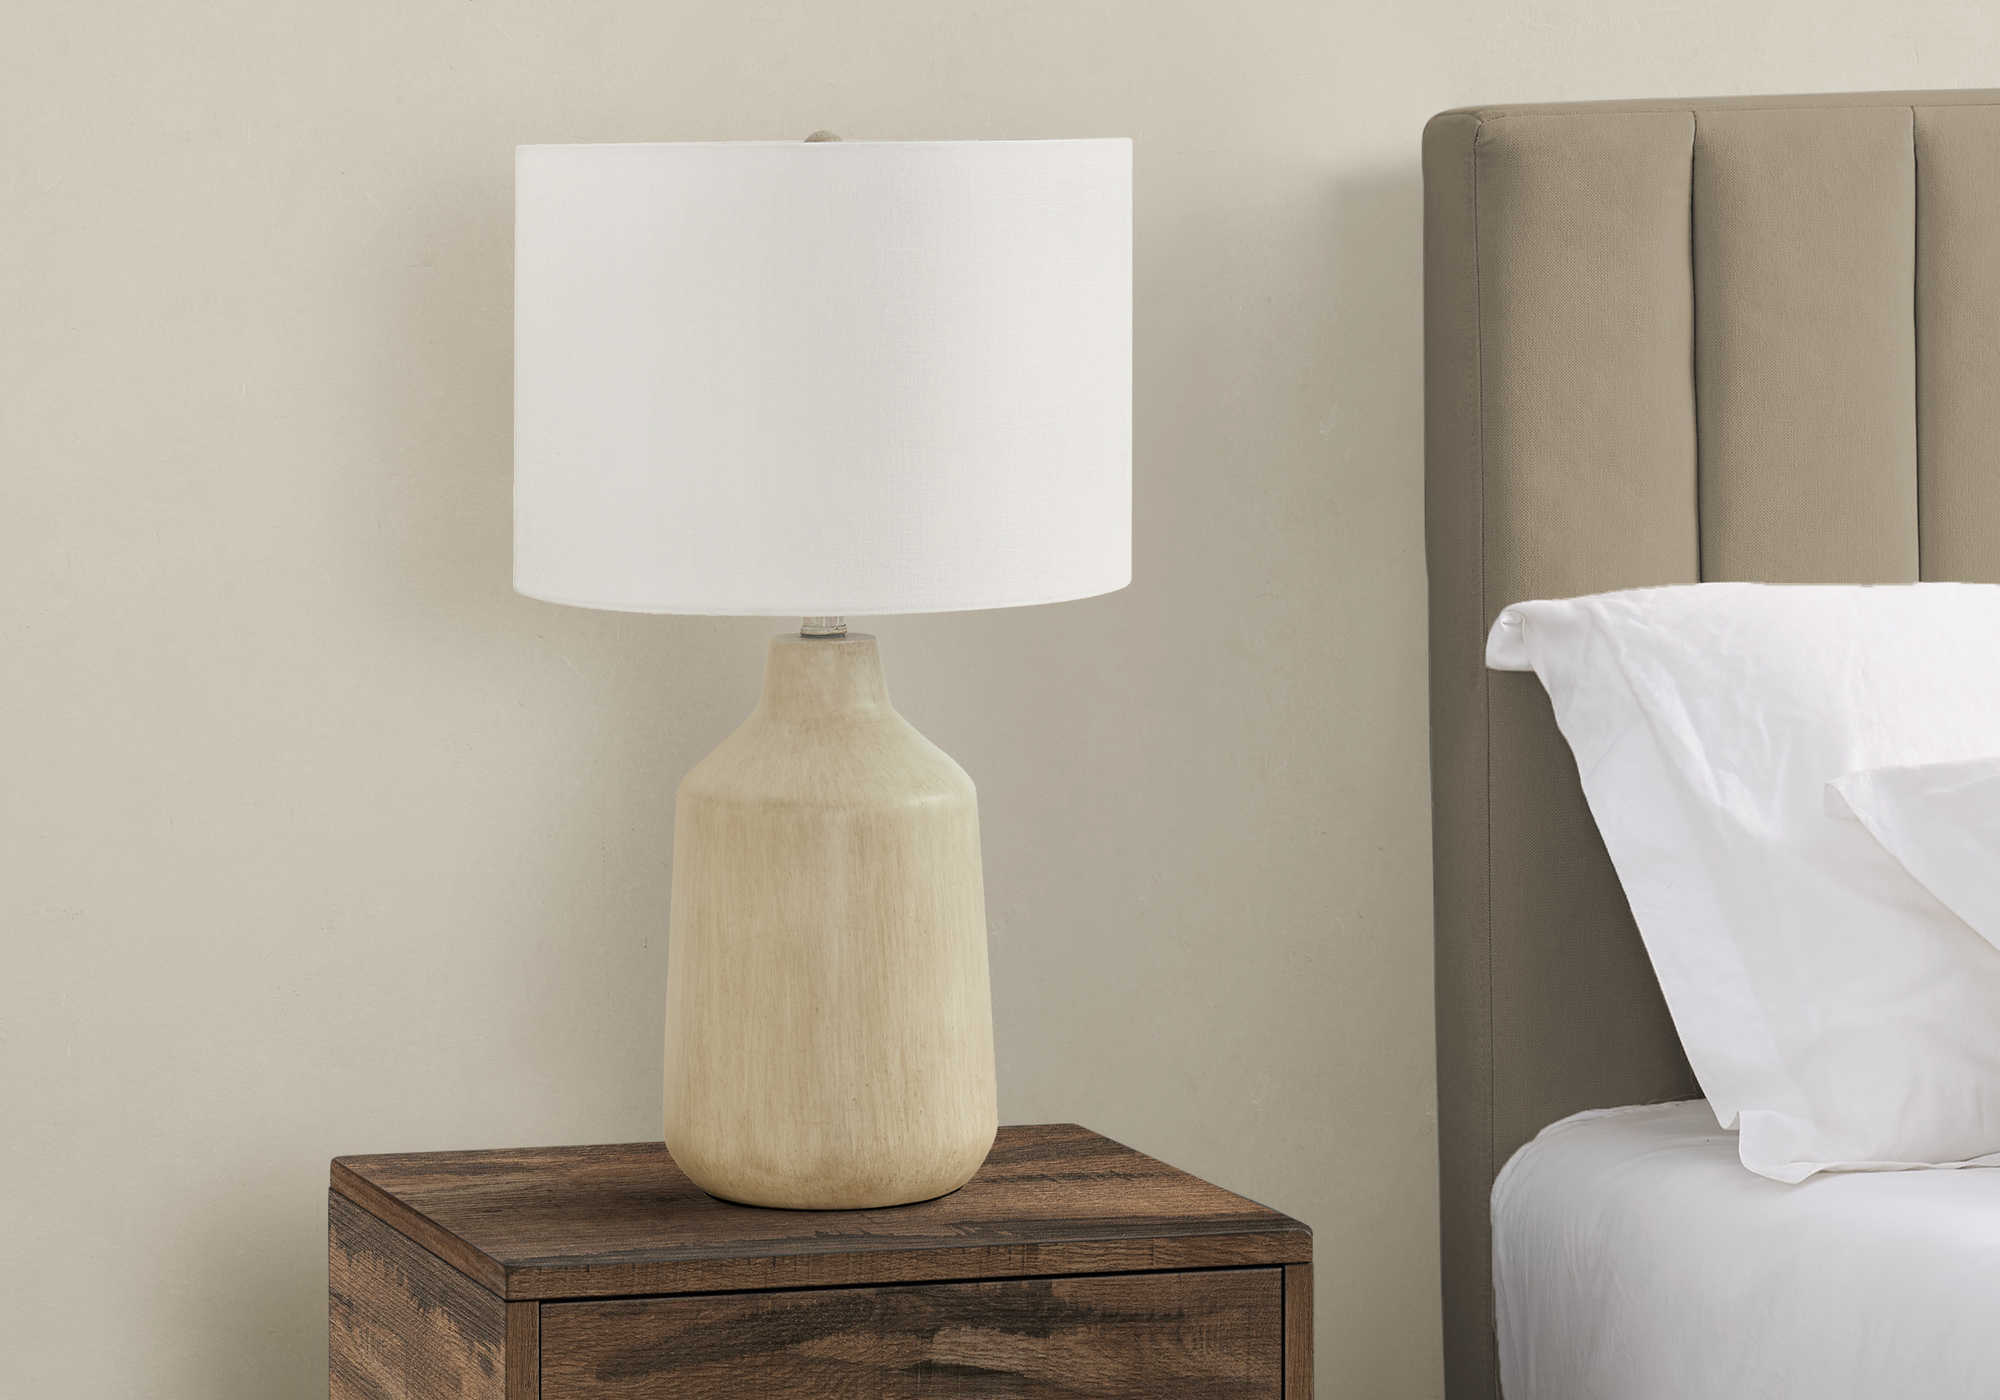 LIGHTING - 24"H TABLE LAMP BEIGE CONCRETE / IVORY SHADE